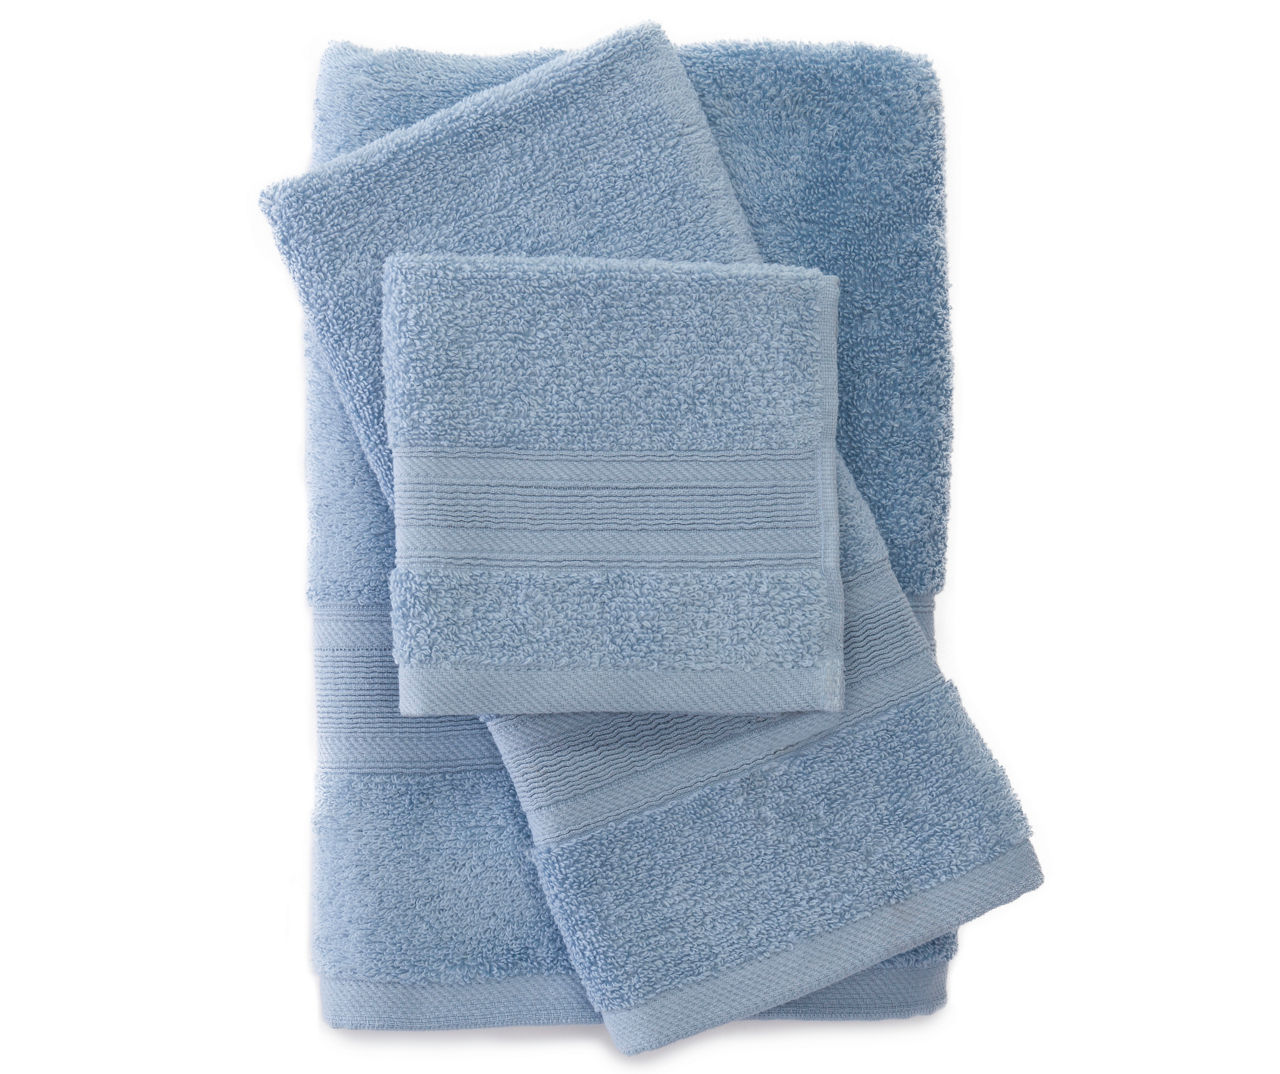  Big Bath Towels Oversized Extra Large, Softness & Absorbent Bath  Towel (27x4754 Inch), Thanksgiving Blue and White Blue Melon Eucalyptus  Flower Lightweight Bath Towel Sheets for Adults, Kid : Home 